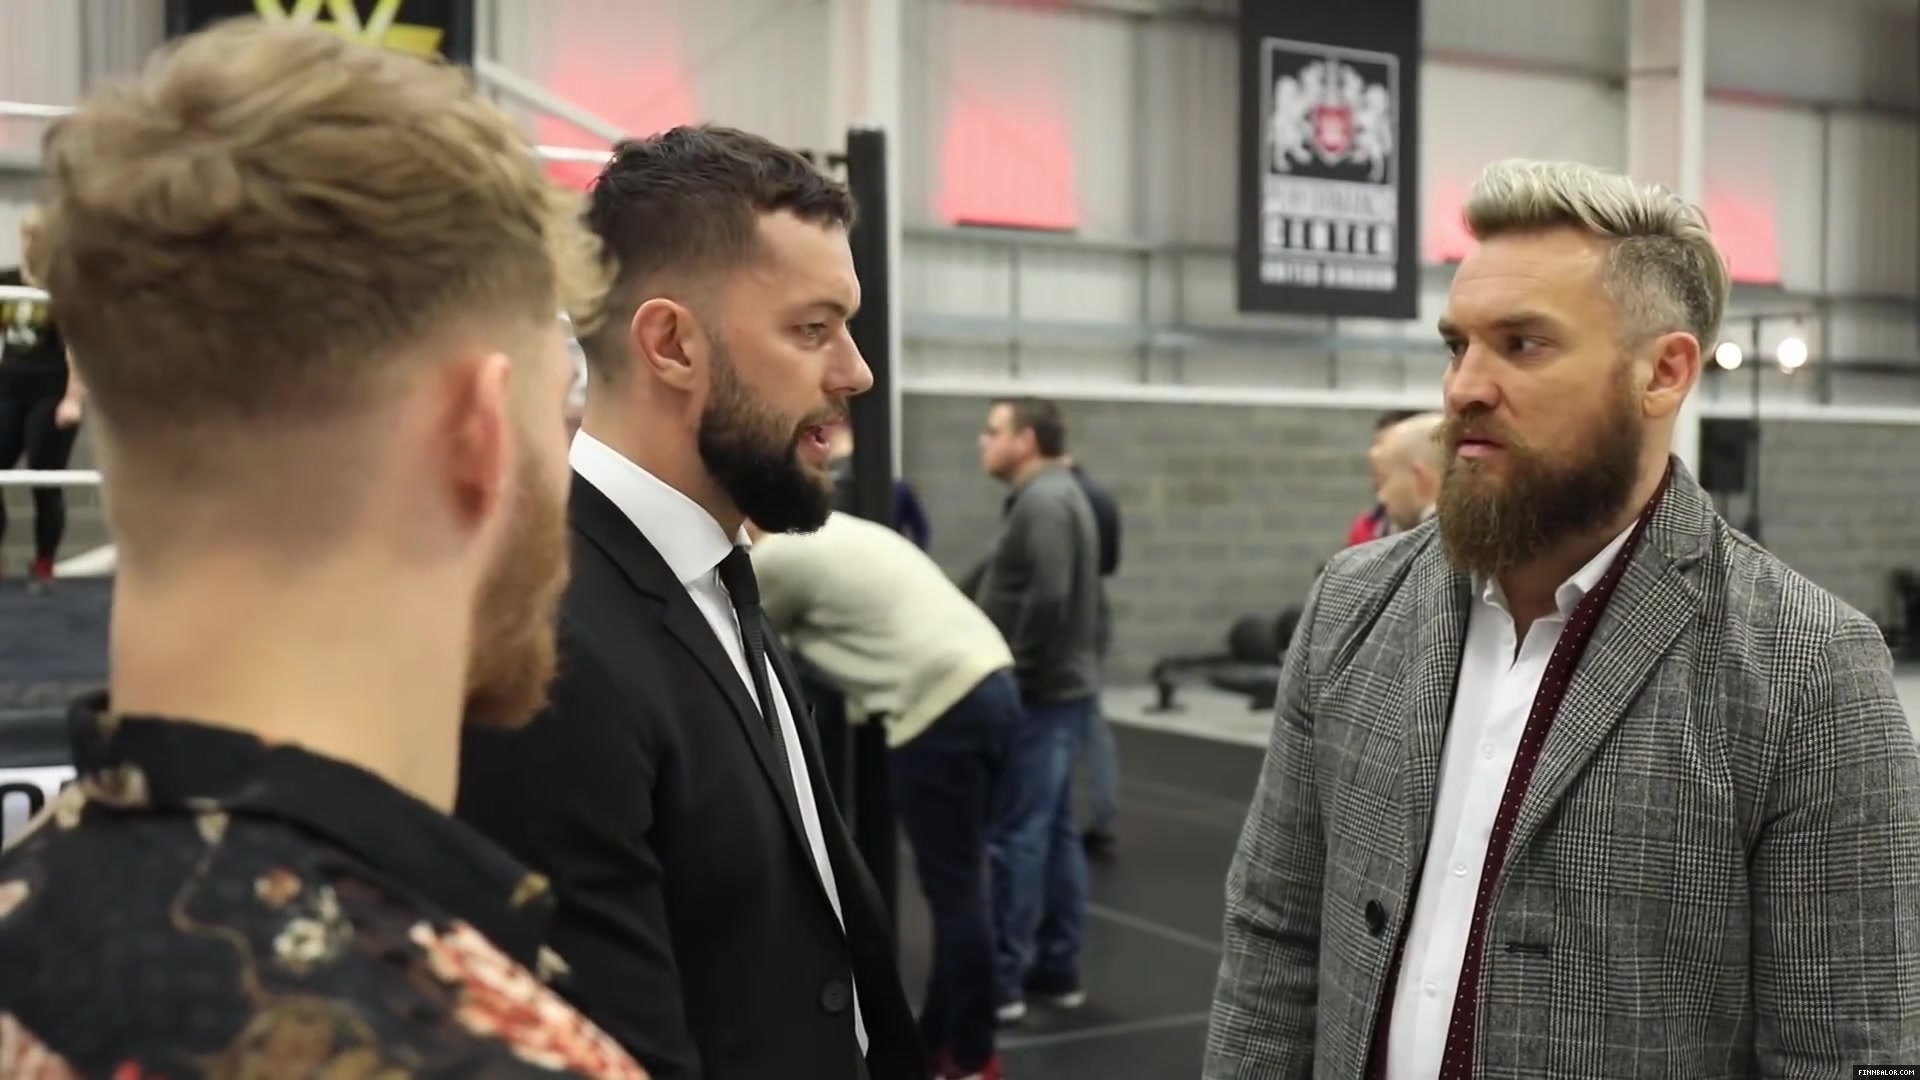 WWE_Superstar_FINN_BALOR_joins_MOUSTACHE_MOUNTAIN_at_the_opening_of_the_NXT_UK_PC_099.jpg